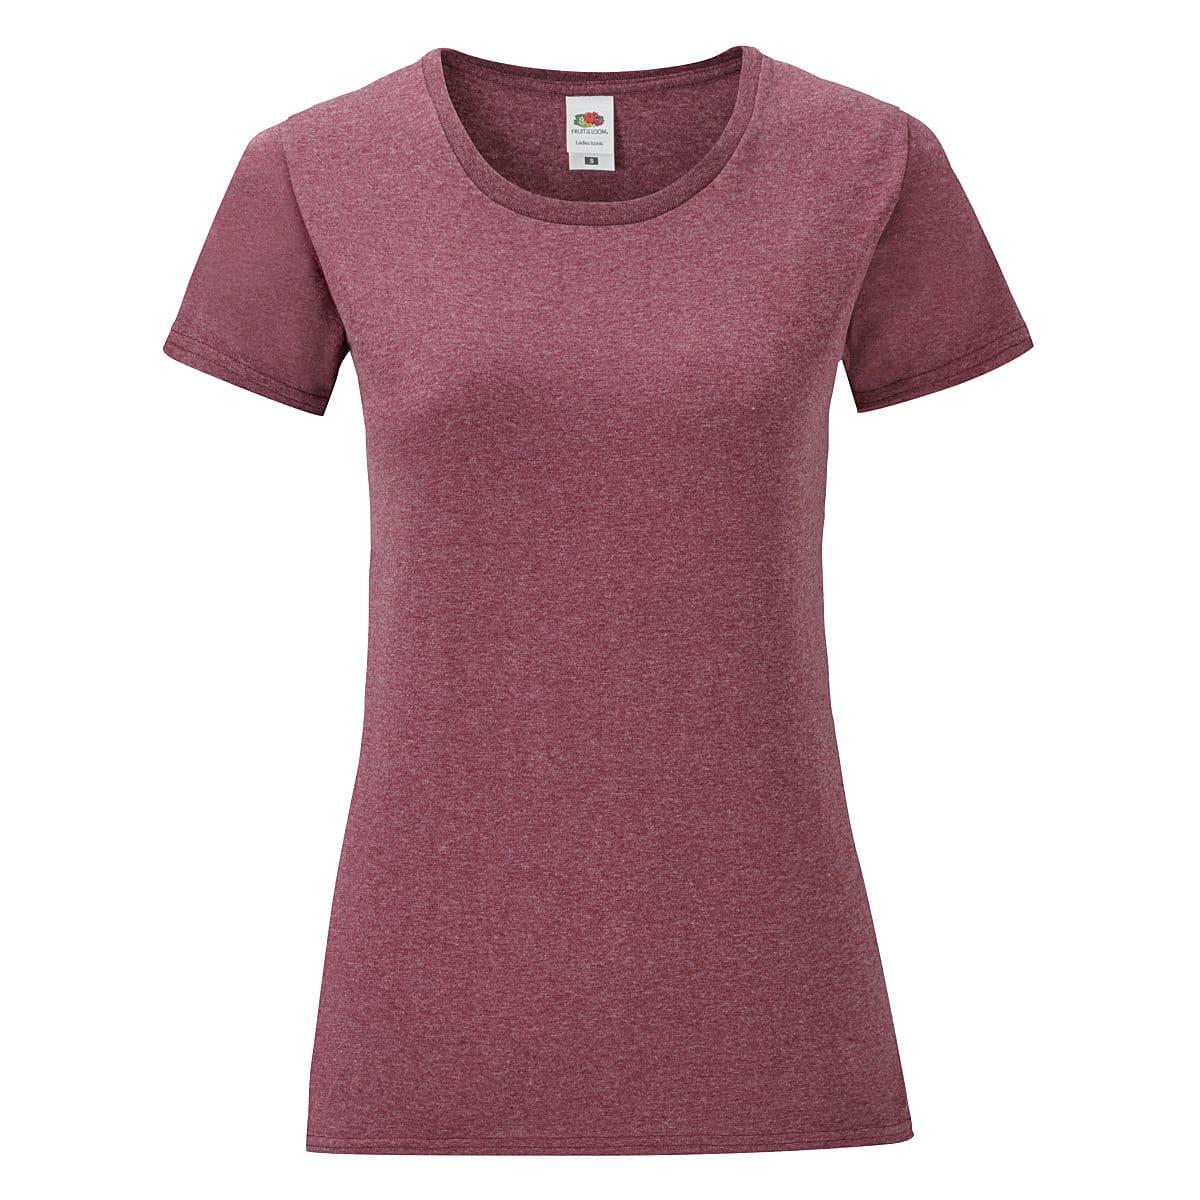 Fruit Of The Loom Womens Iconic T-Shirt in Heather Burgundy (Product Code: 61432)